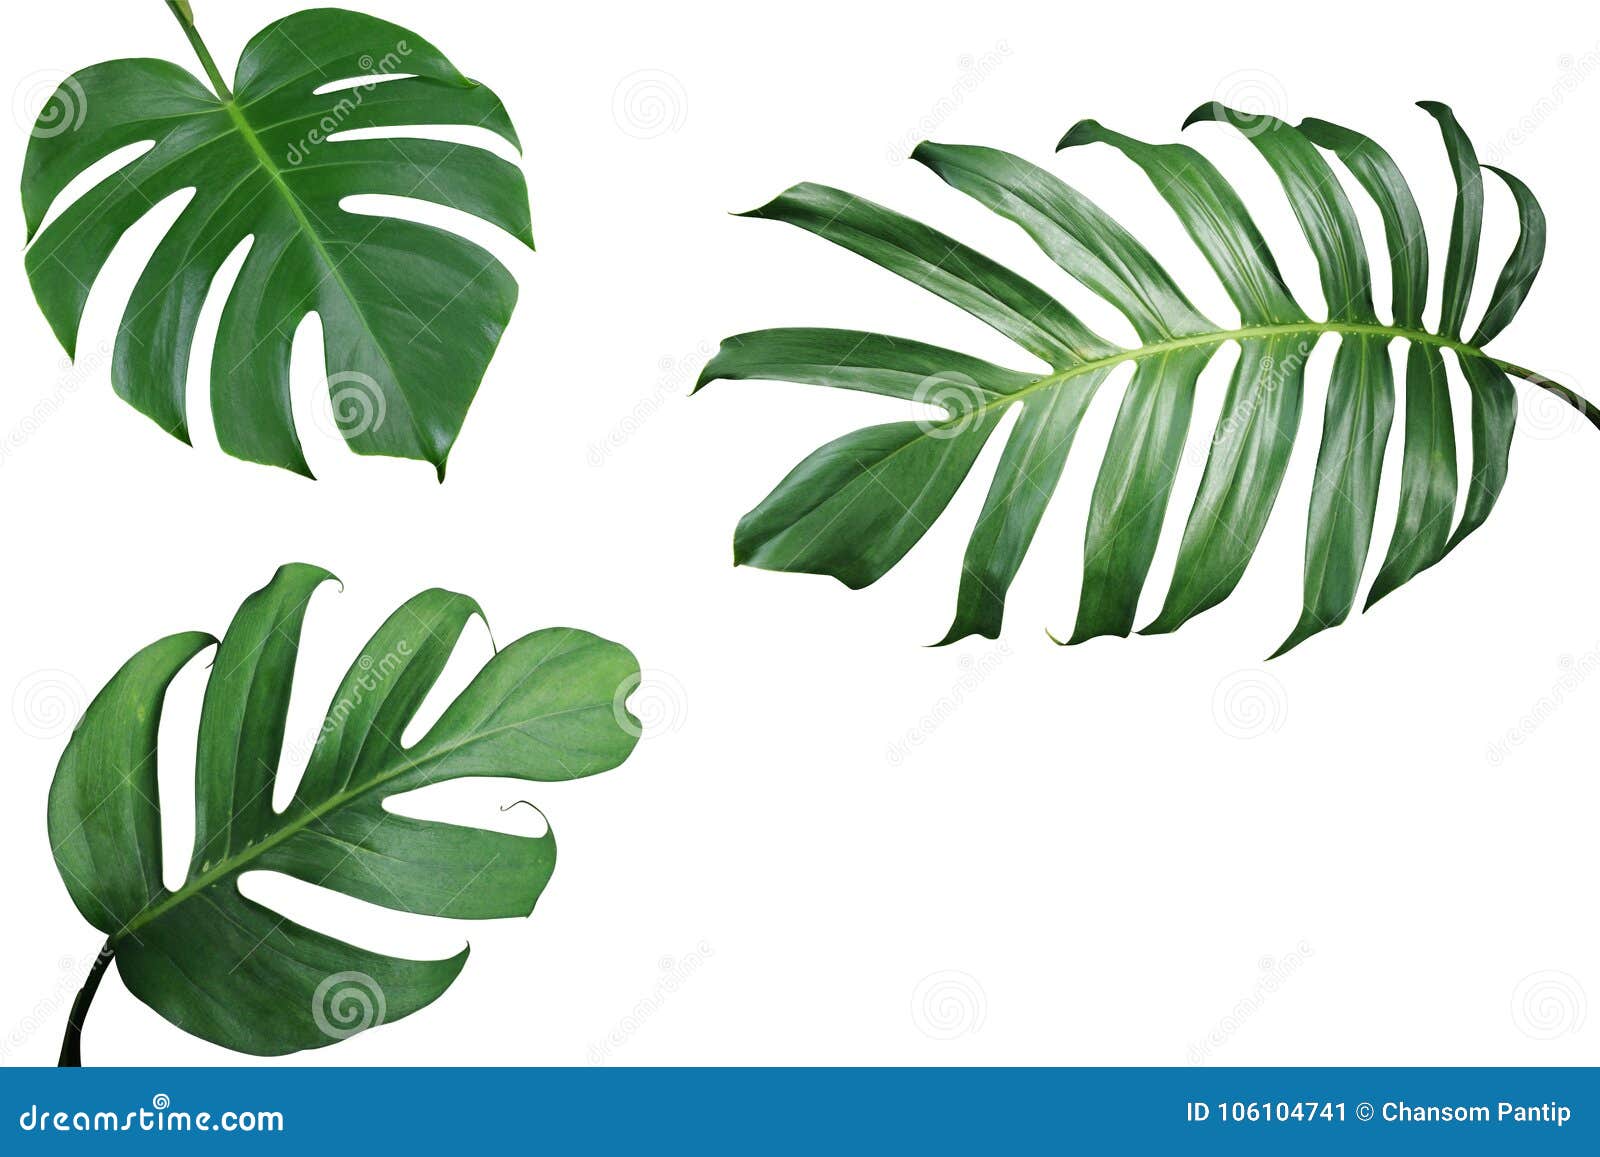 tropical leaves nature frame layout of monstera and split-leaf p